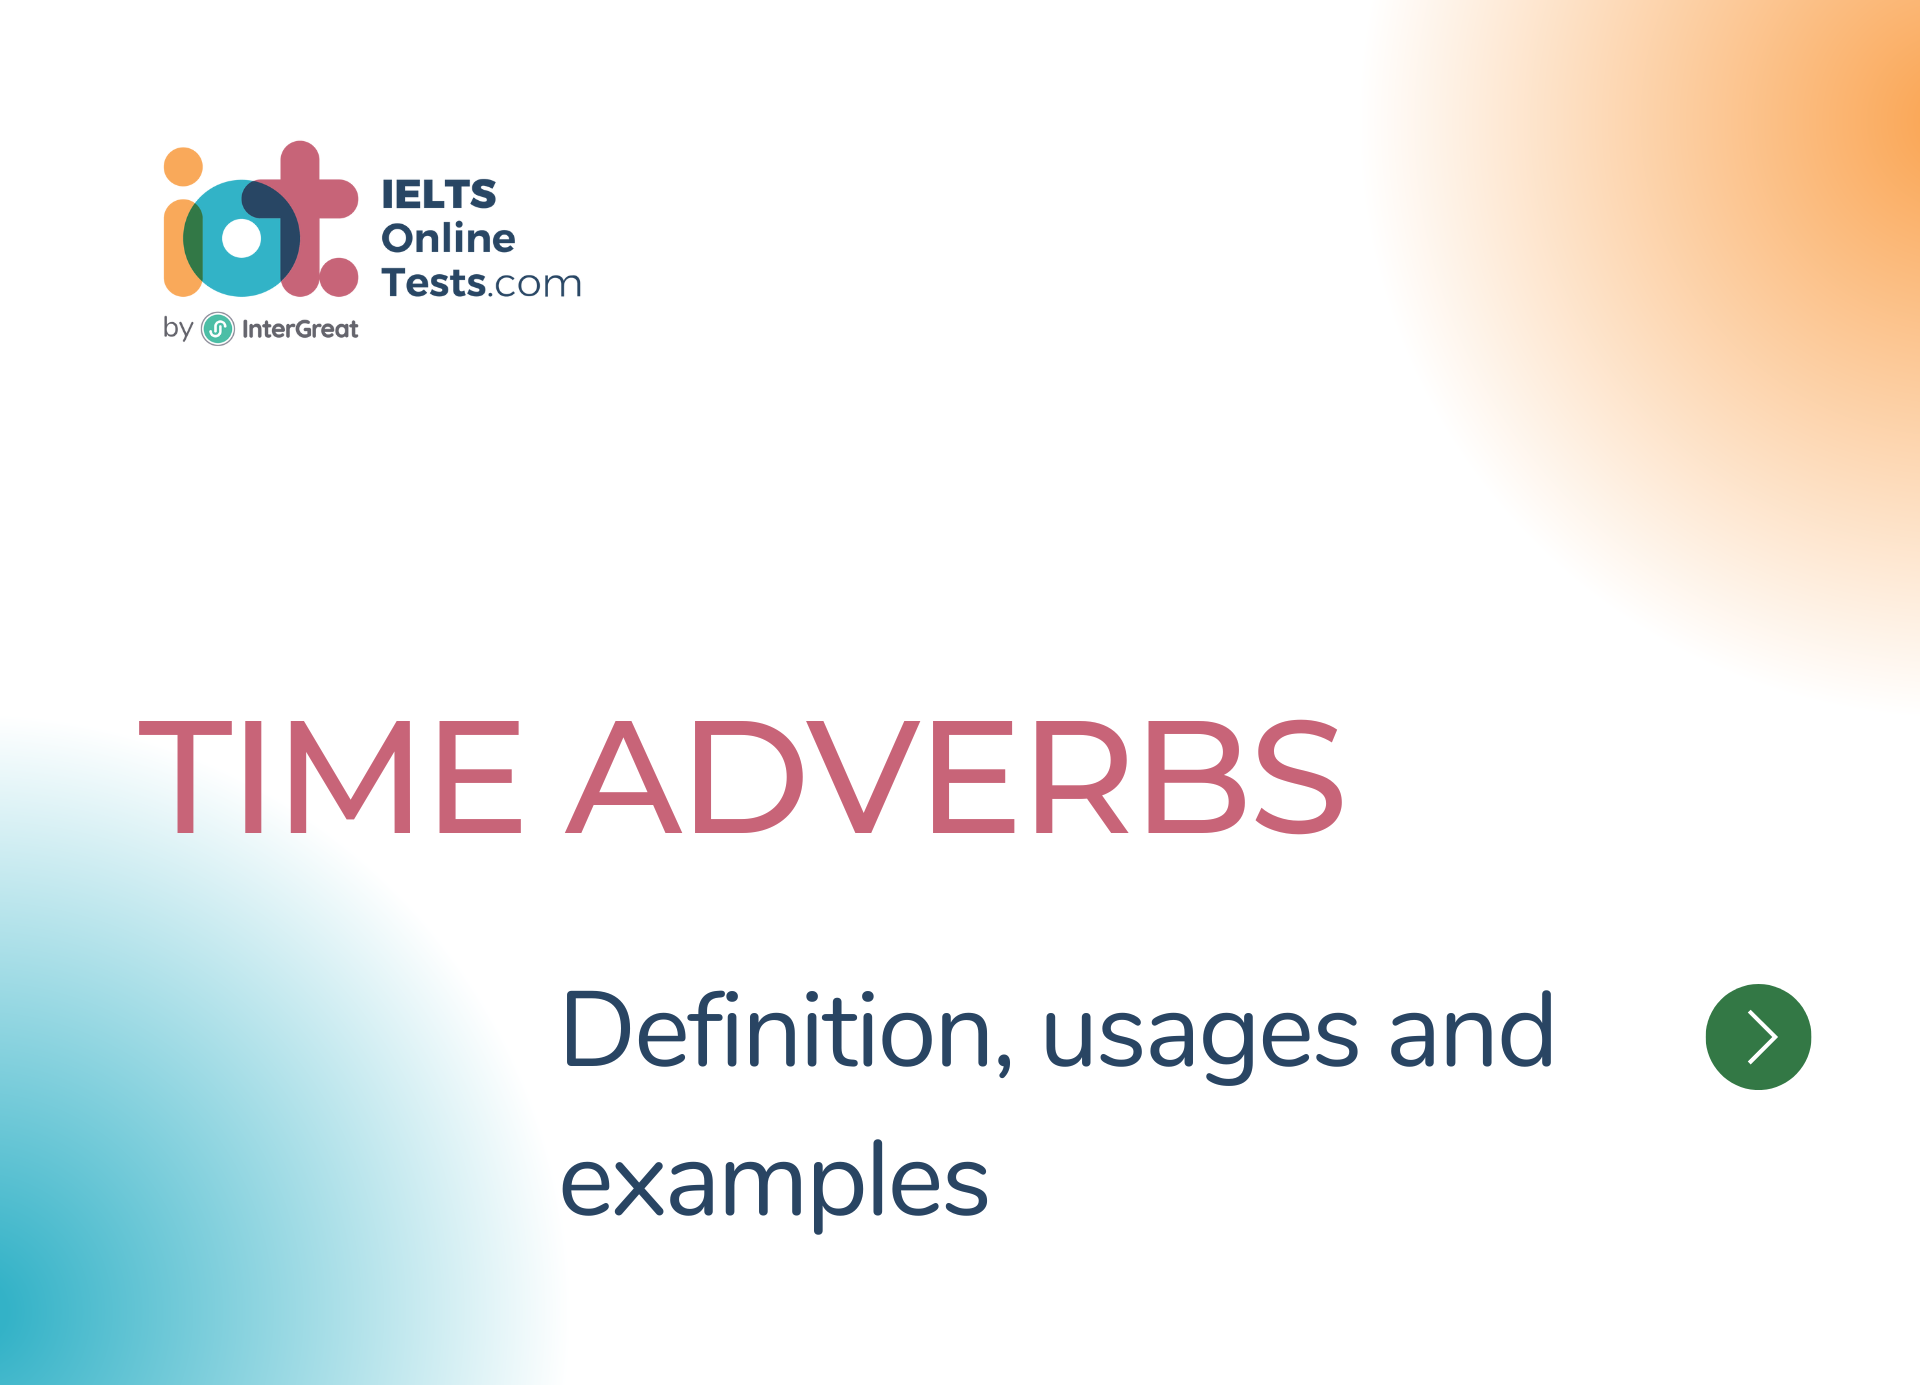 Time adverbs